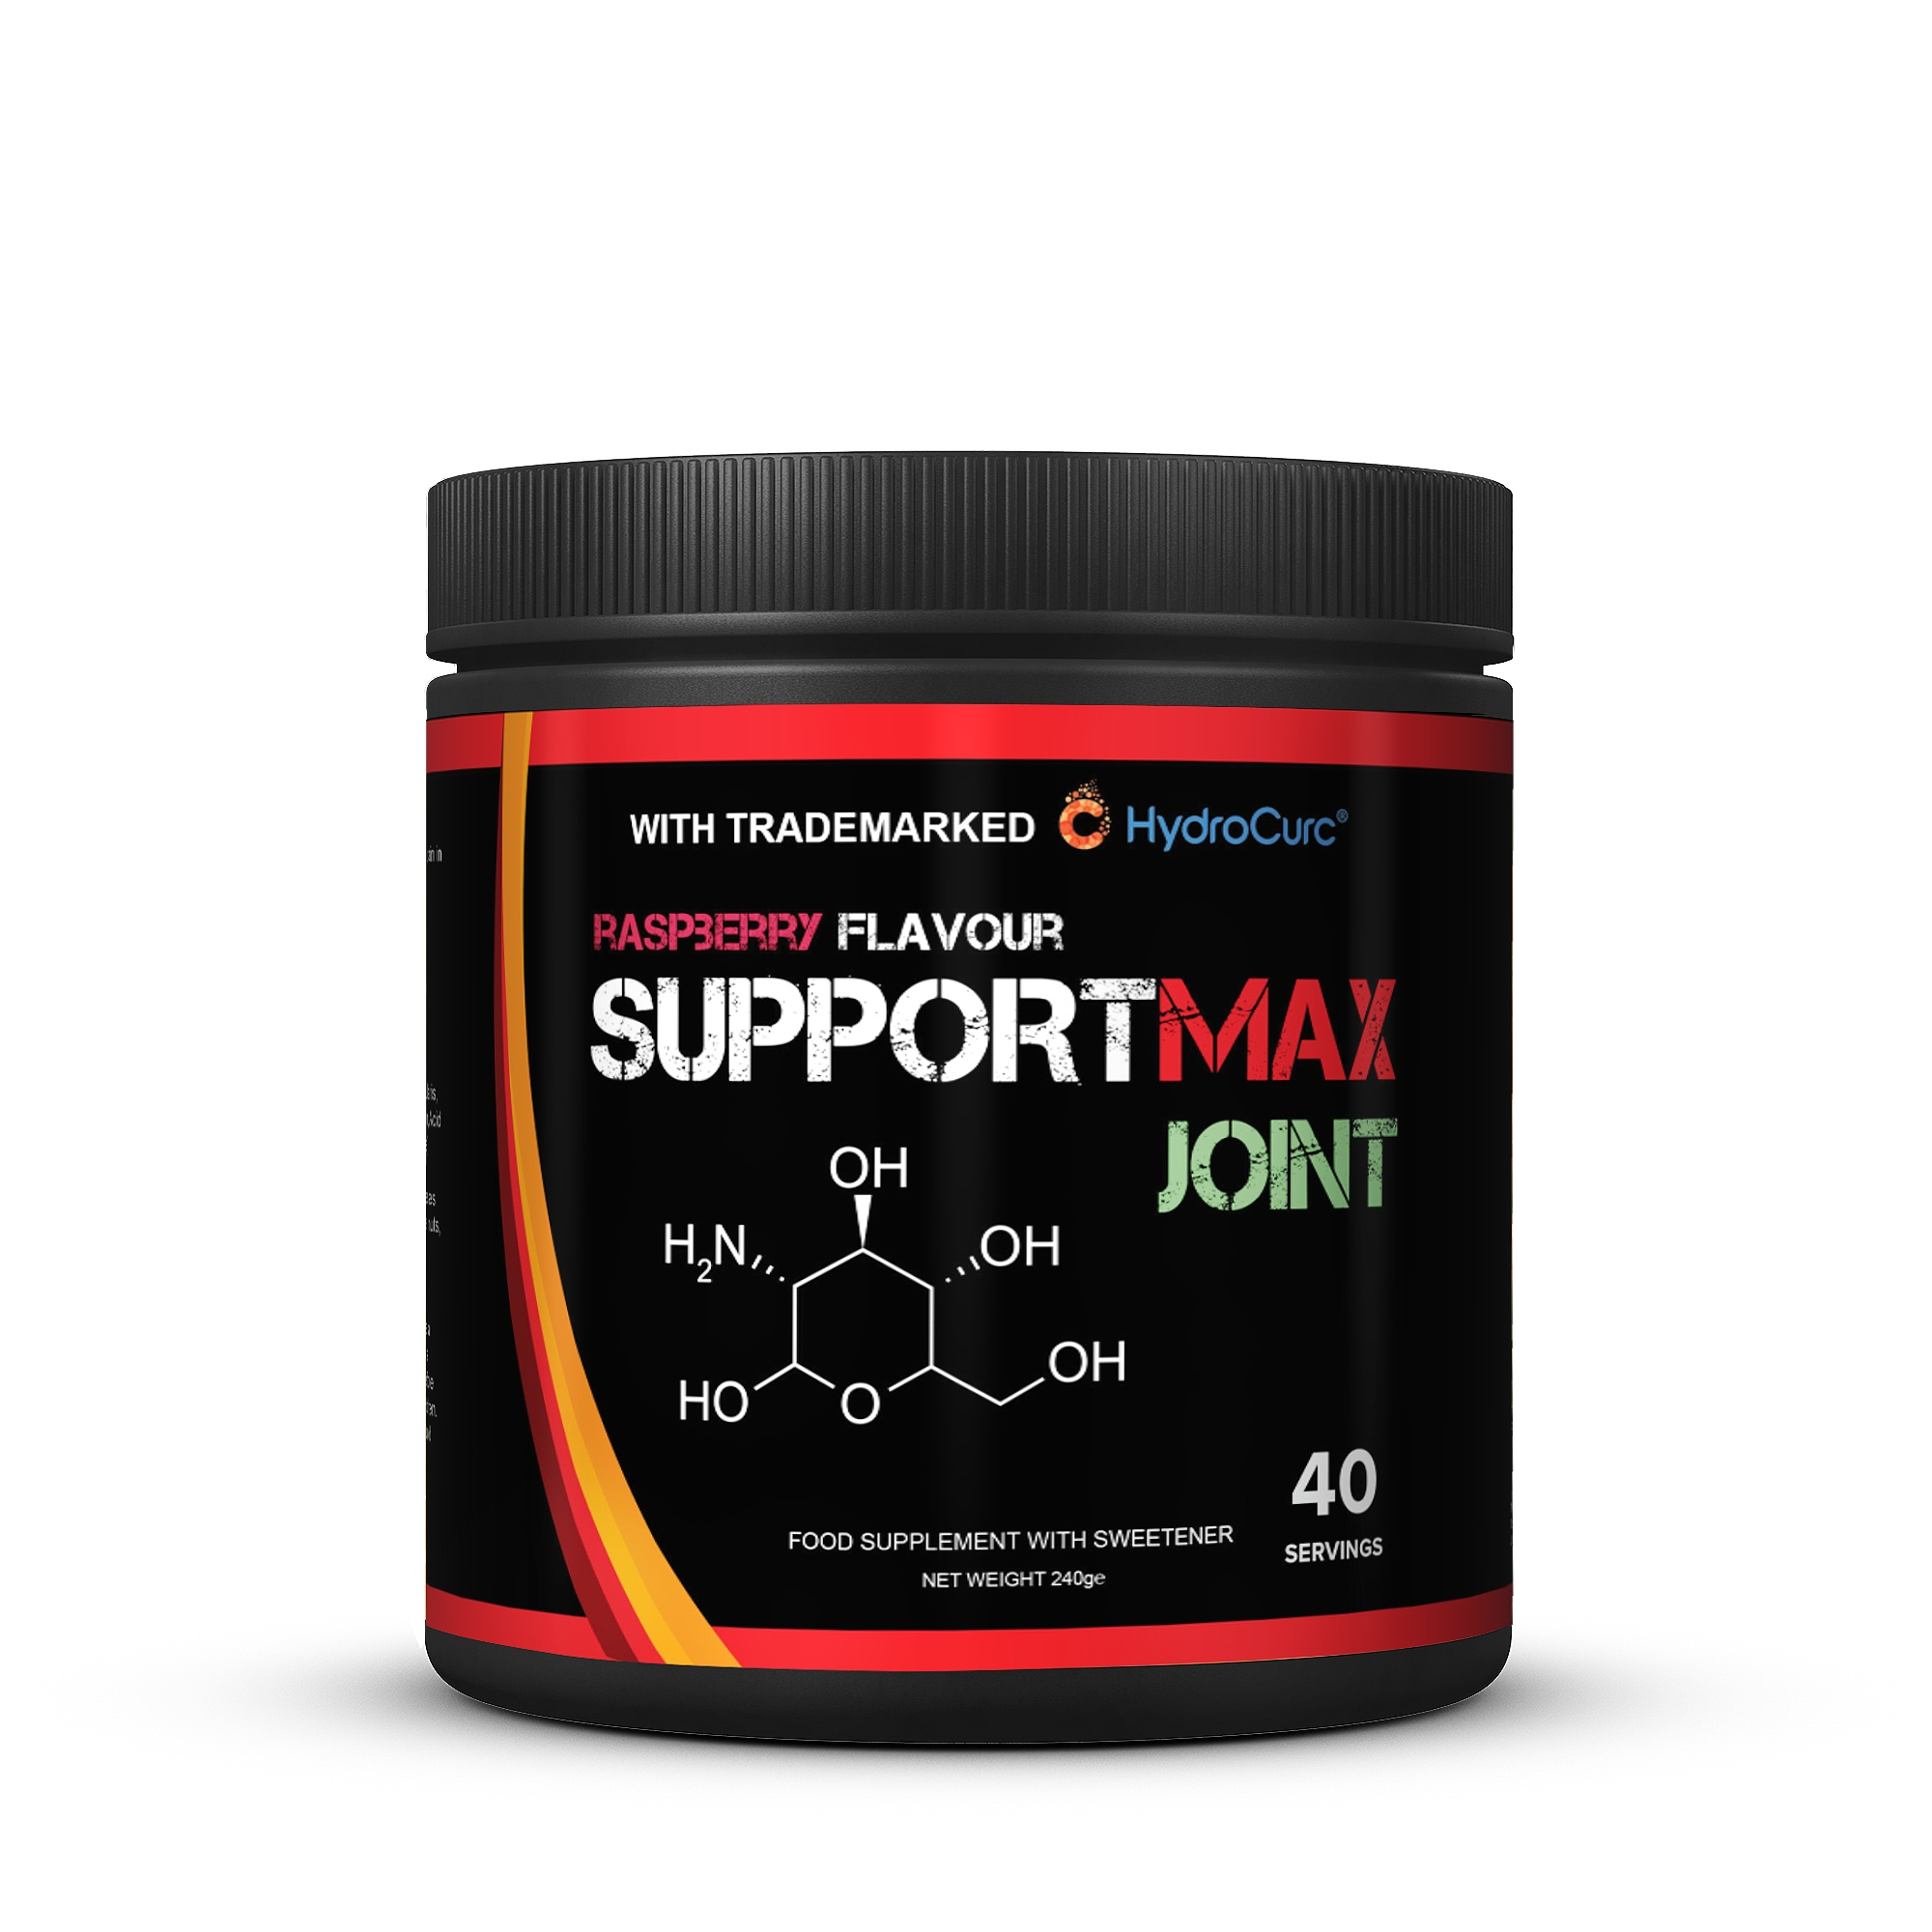 SUPPORTMAX JOINT CAPSULES/POWDER - 40 SERVINGS